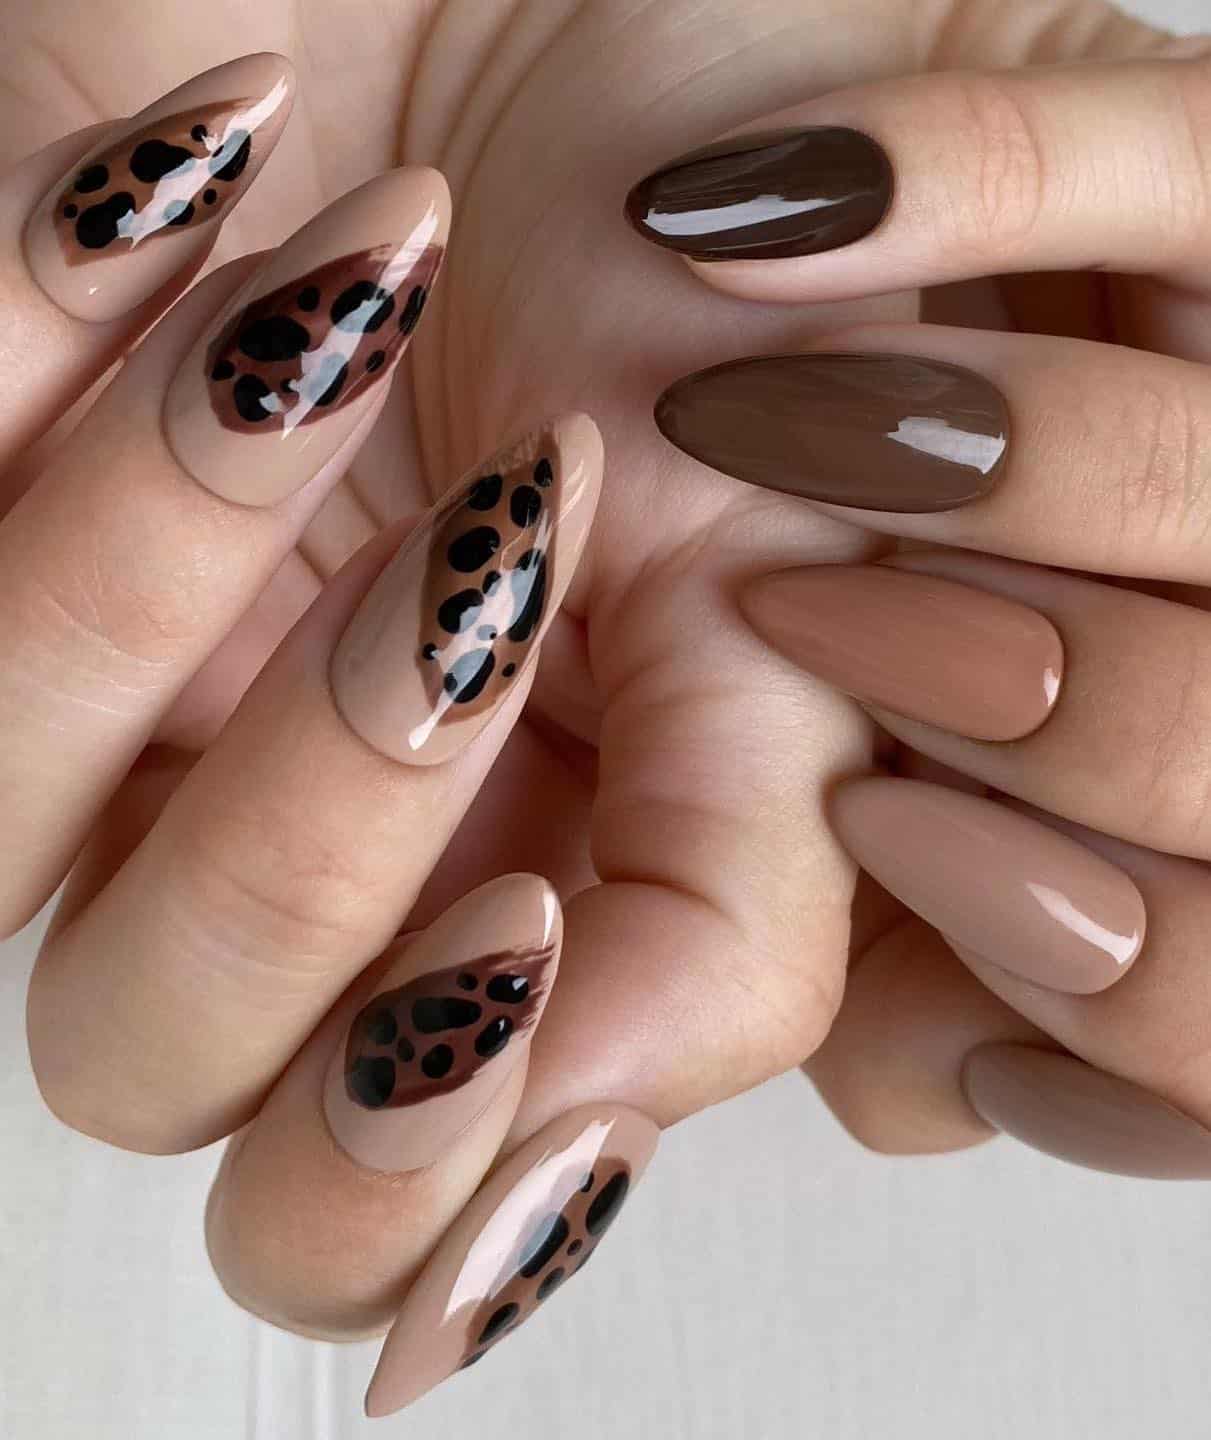 Two hands with medium almond nails painted a brown and beige gradient design on one hand, and the other painted a beige color with brown animal print nail art.